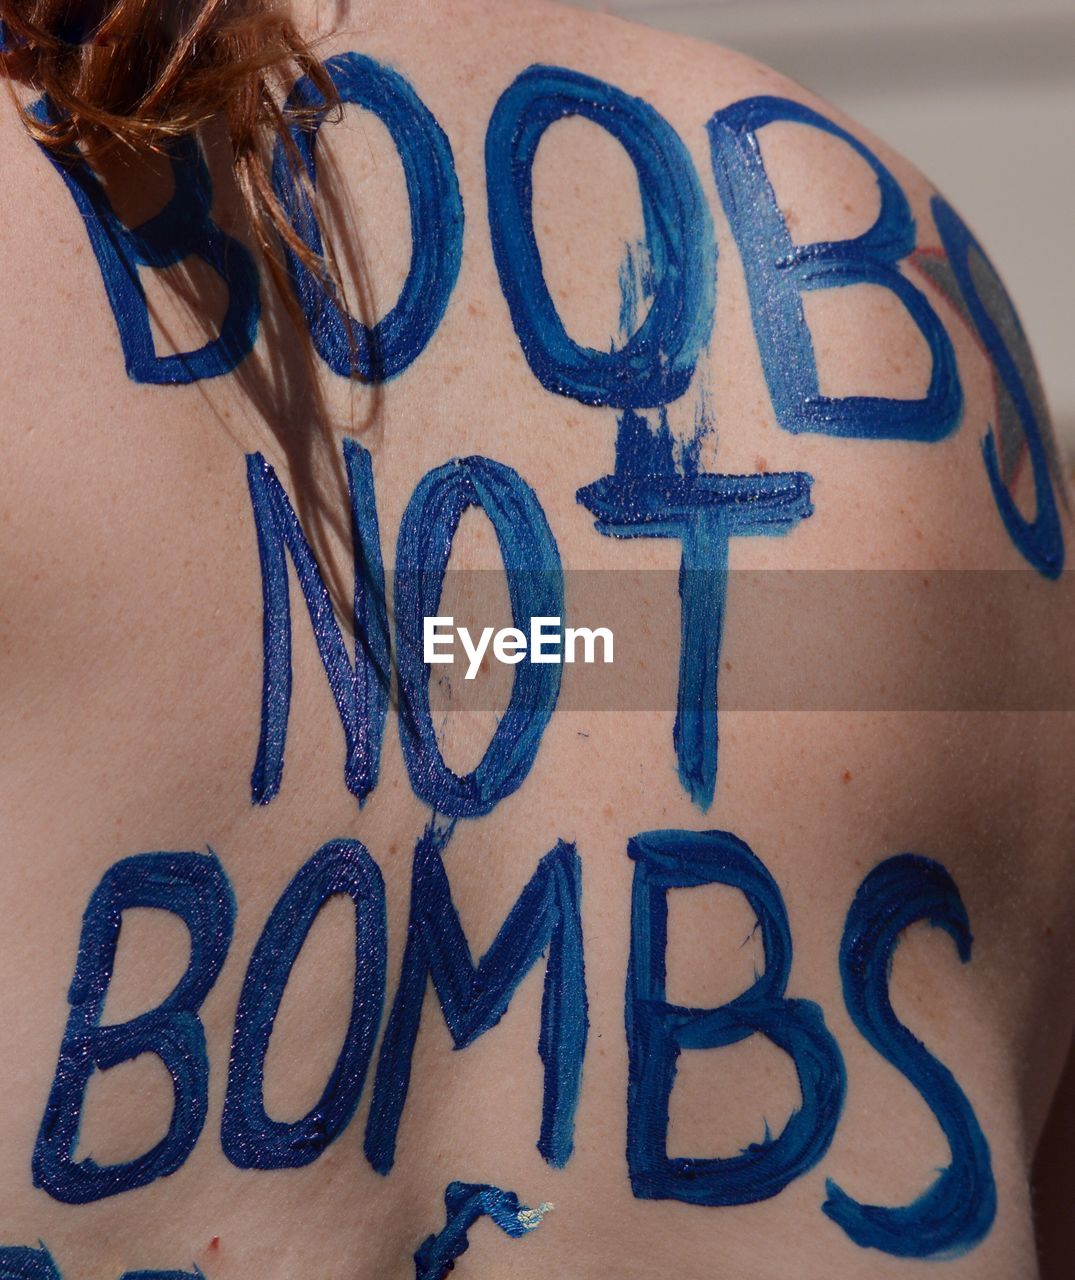 Rear view of shirtless woman with message on back